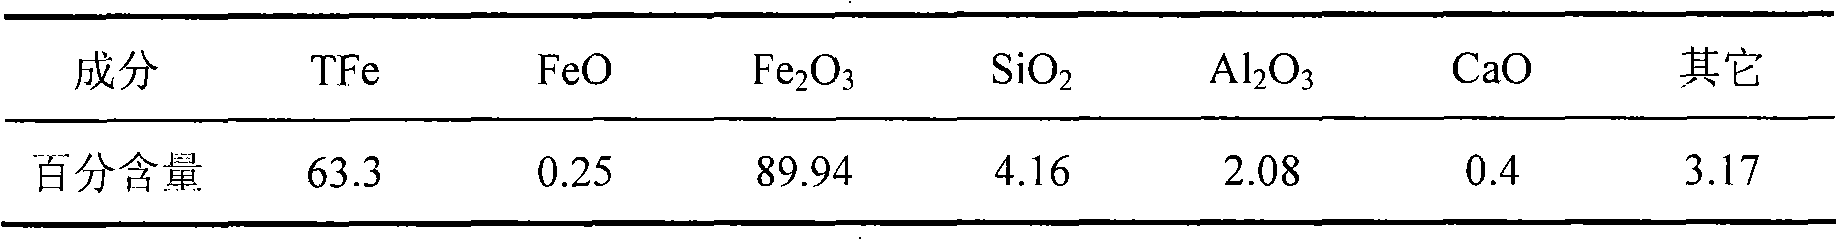 Method for preparing iron sulfate with iron ore